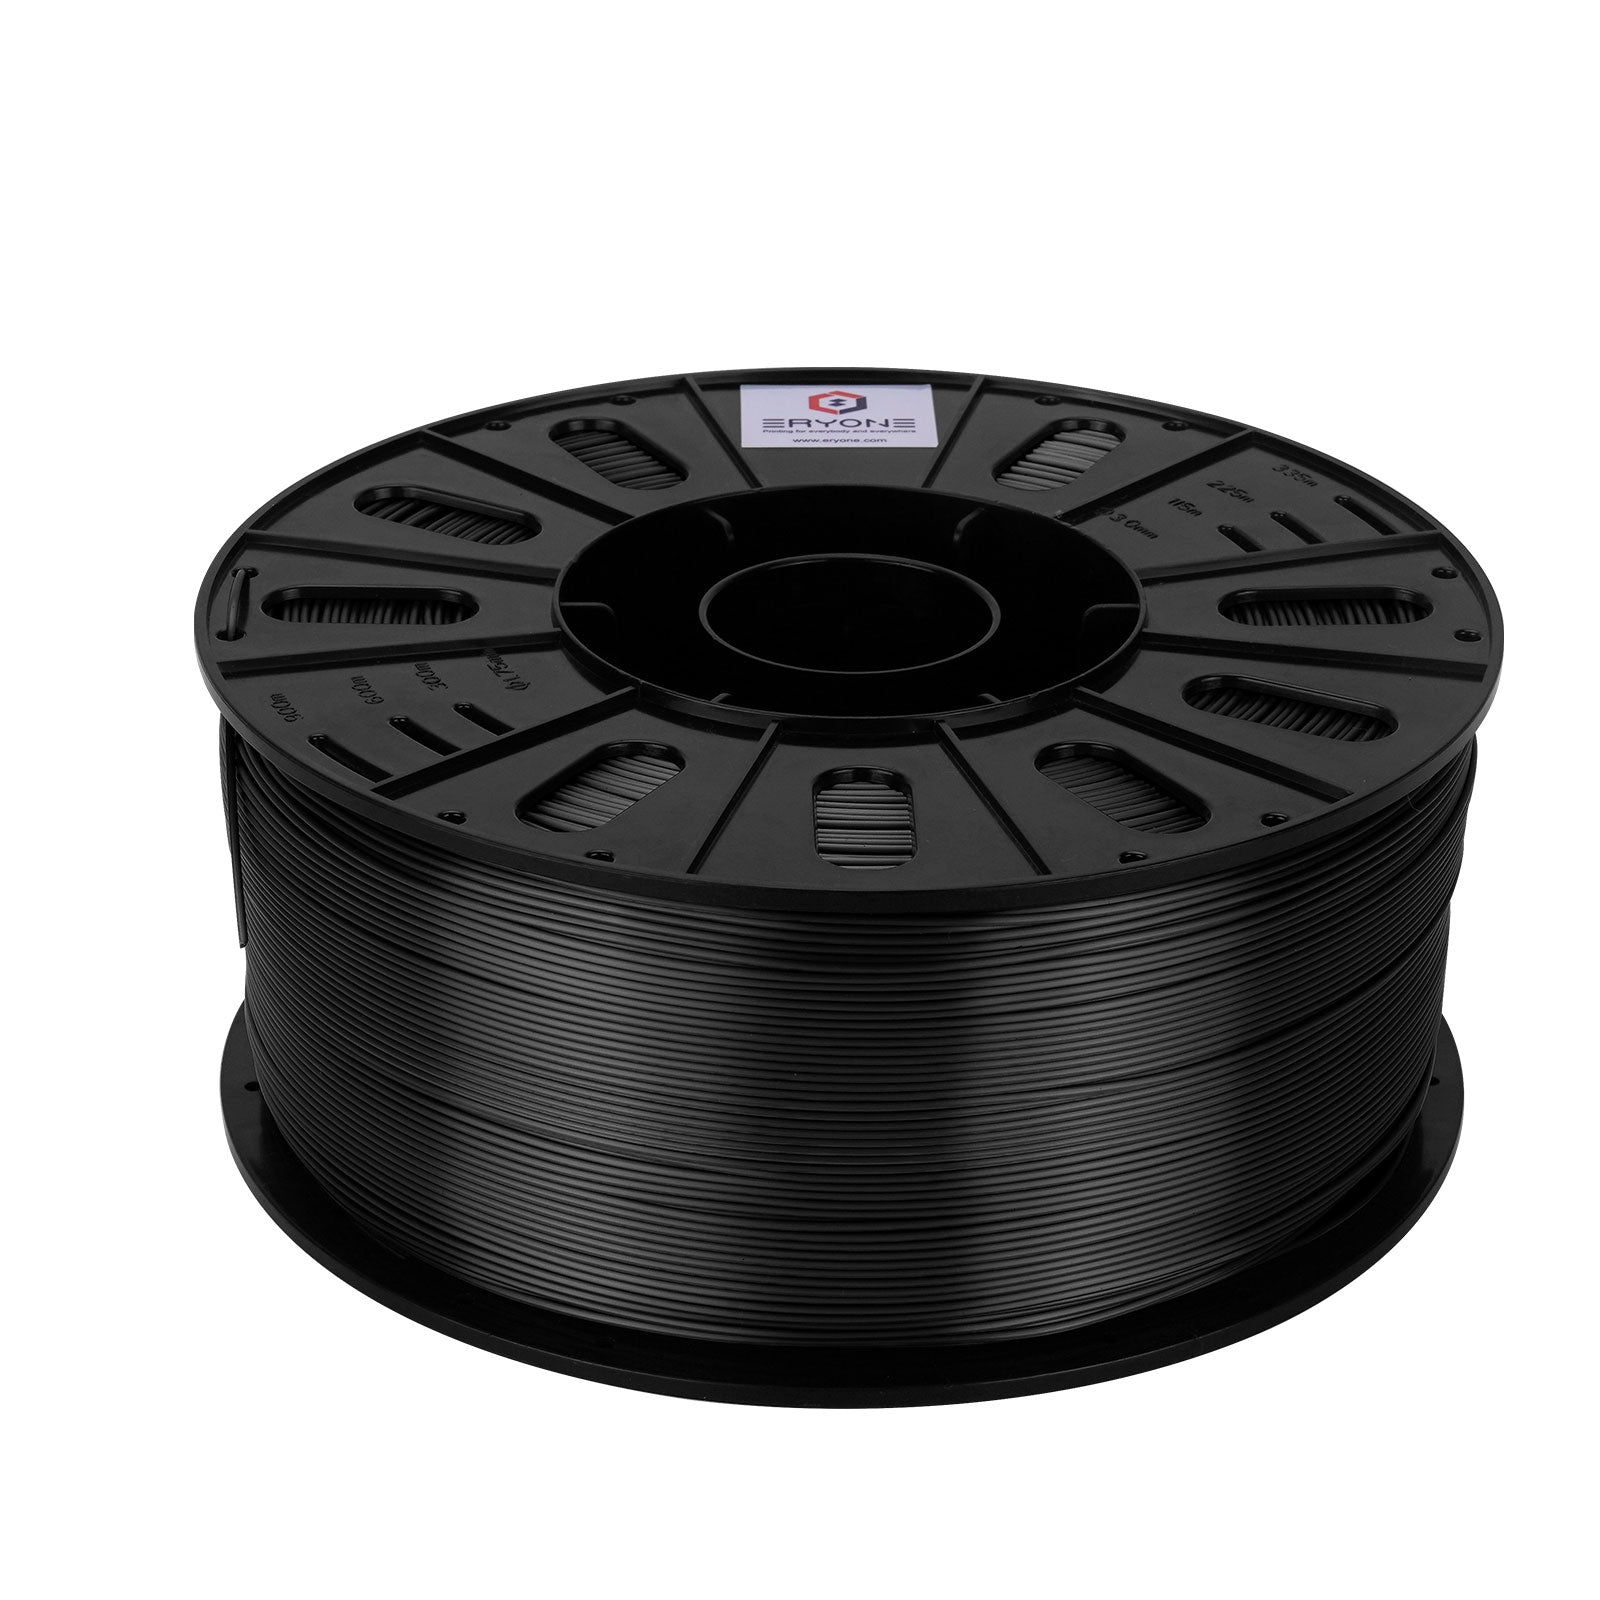 Articles - Eryone Filament PLA Black and White Review - CNC File Sharing -  Free Files for 3Axis machines & More - Eryone Filament PLA Black And White  Review